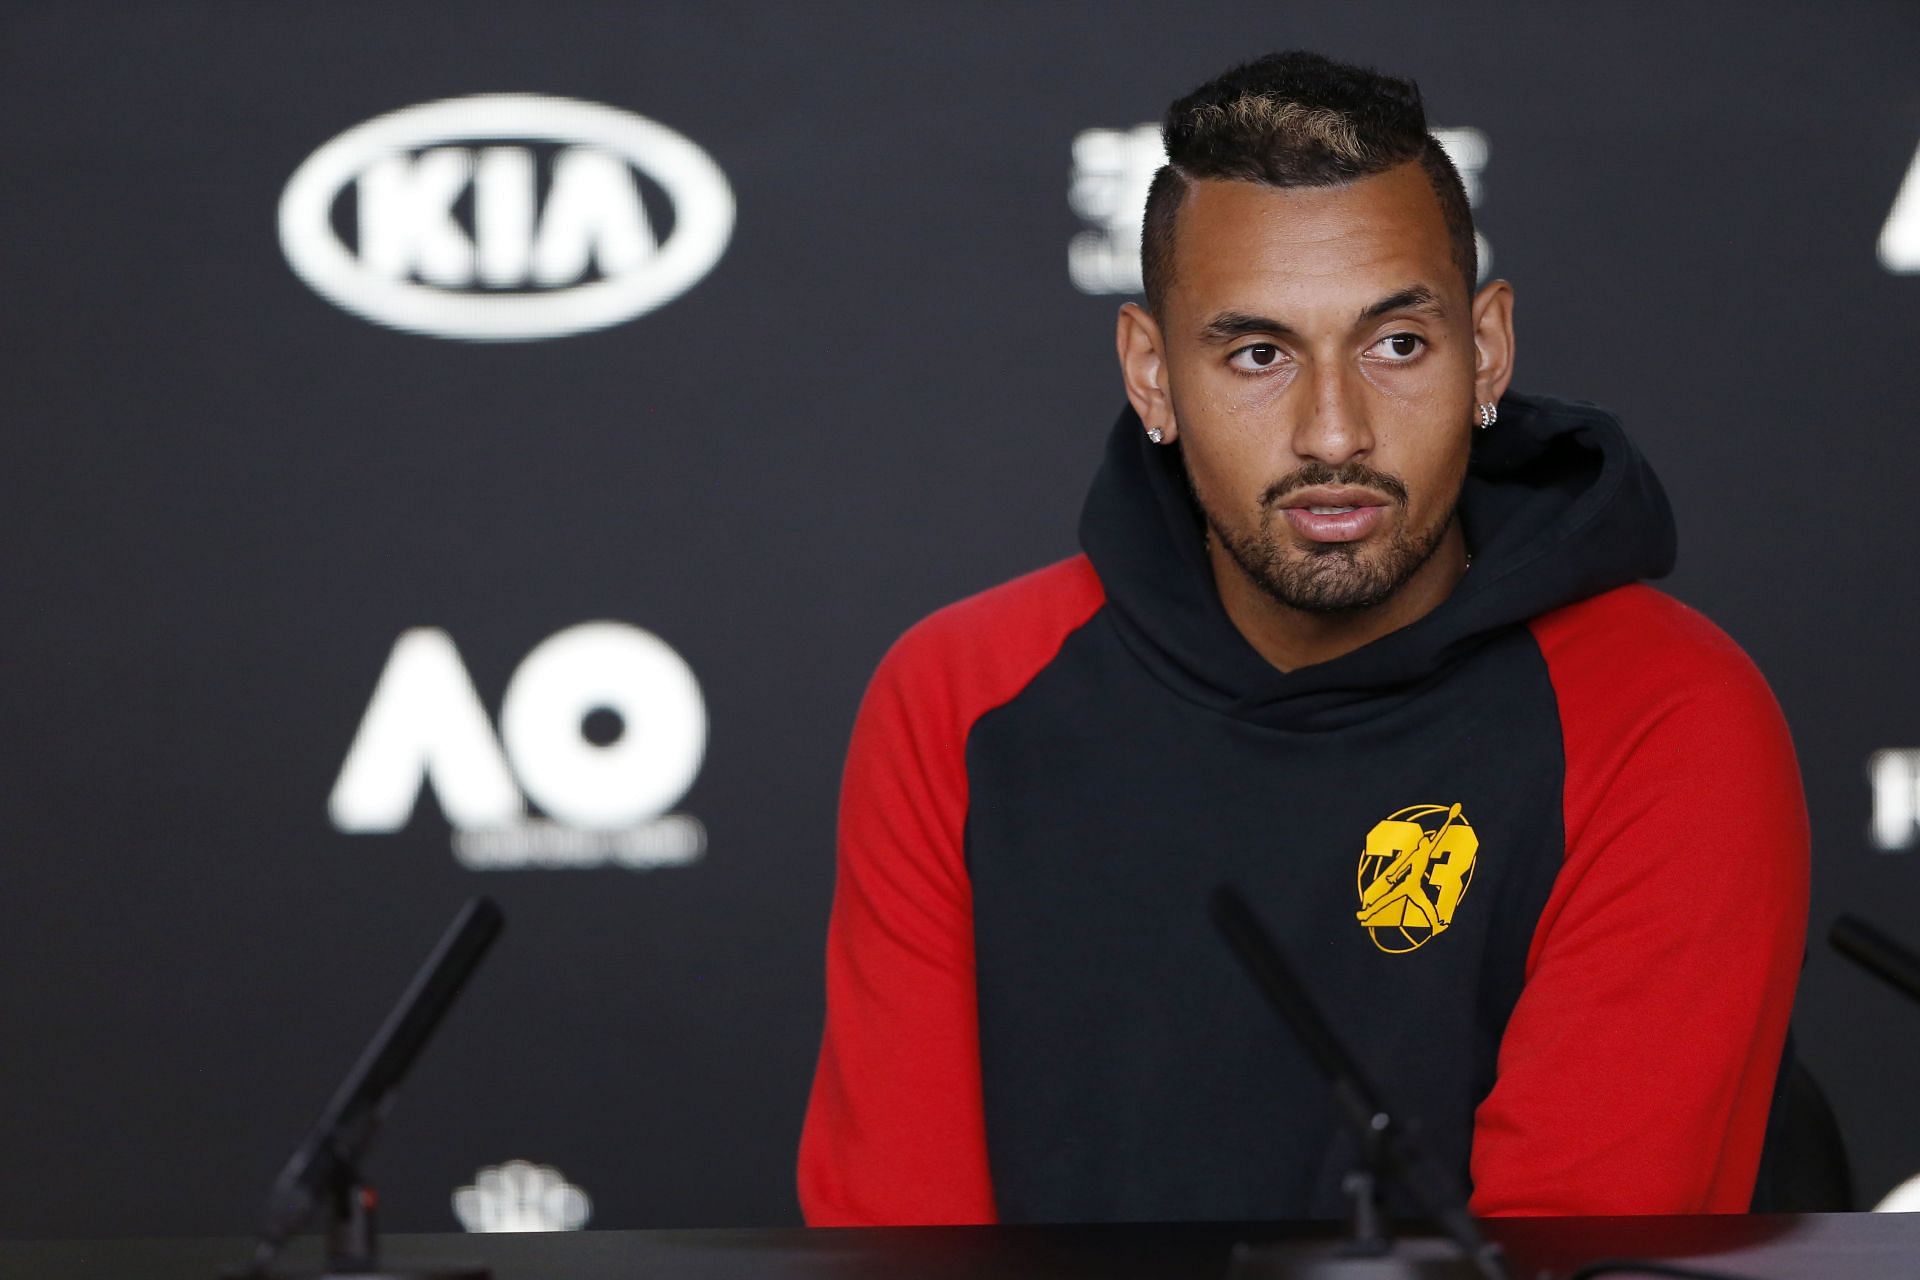 Nick Kyrgios speaking to the press ahead of the 2019 Australian Open